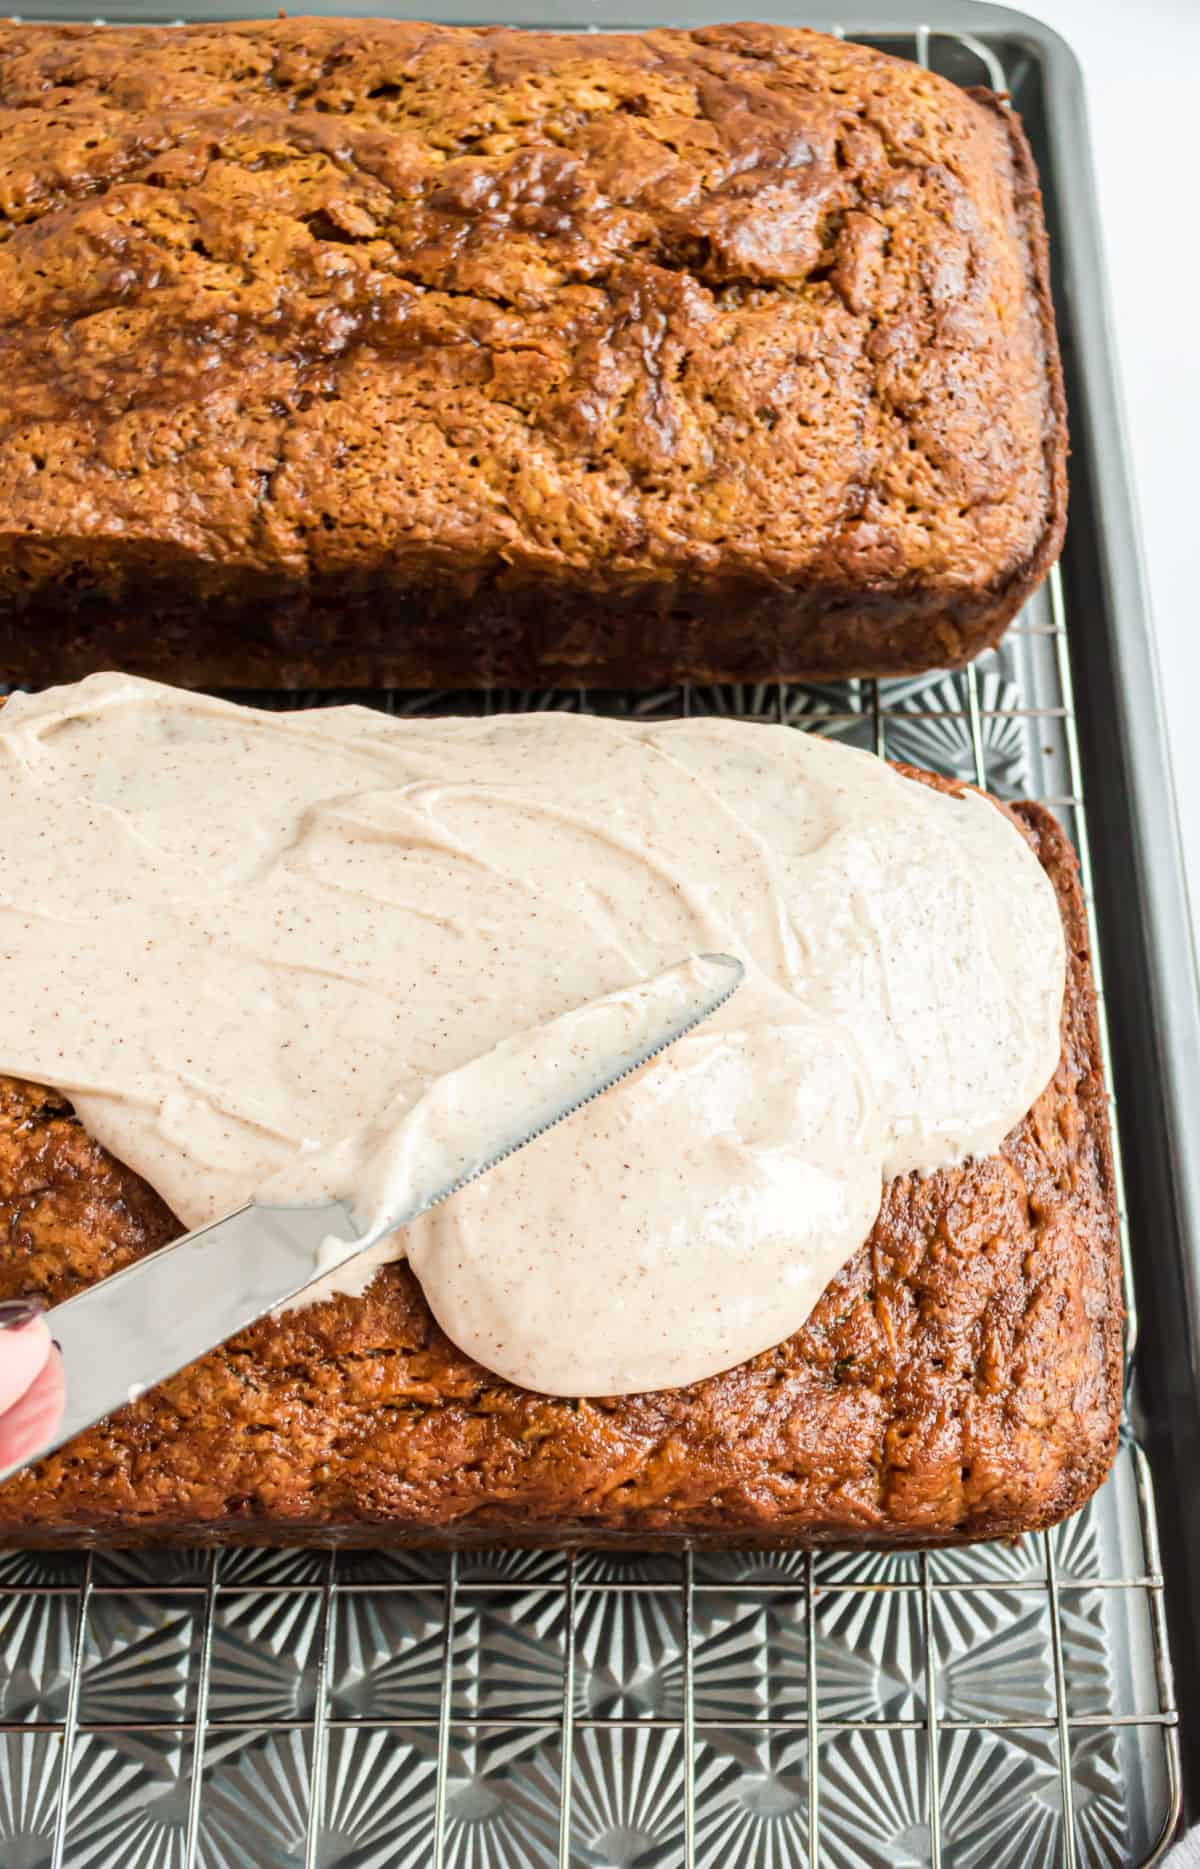 Cinnamon frosting being spread over cooled pumpkin bread.